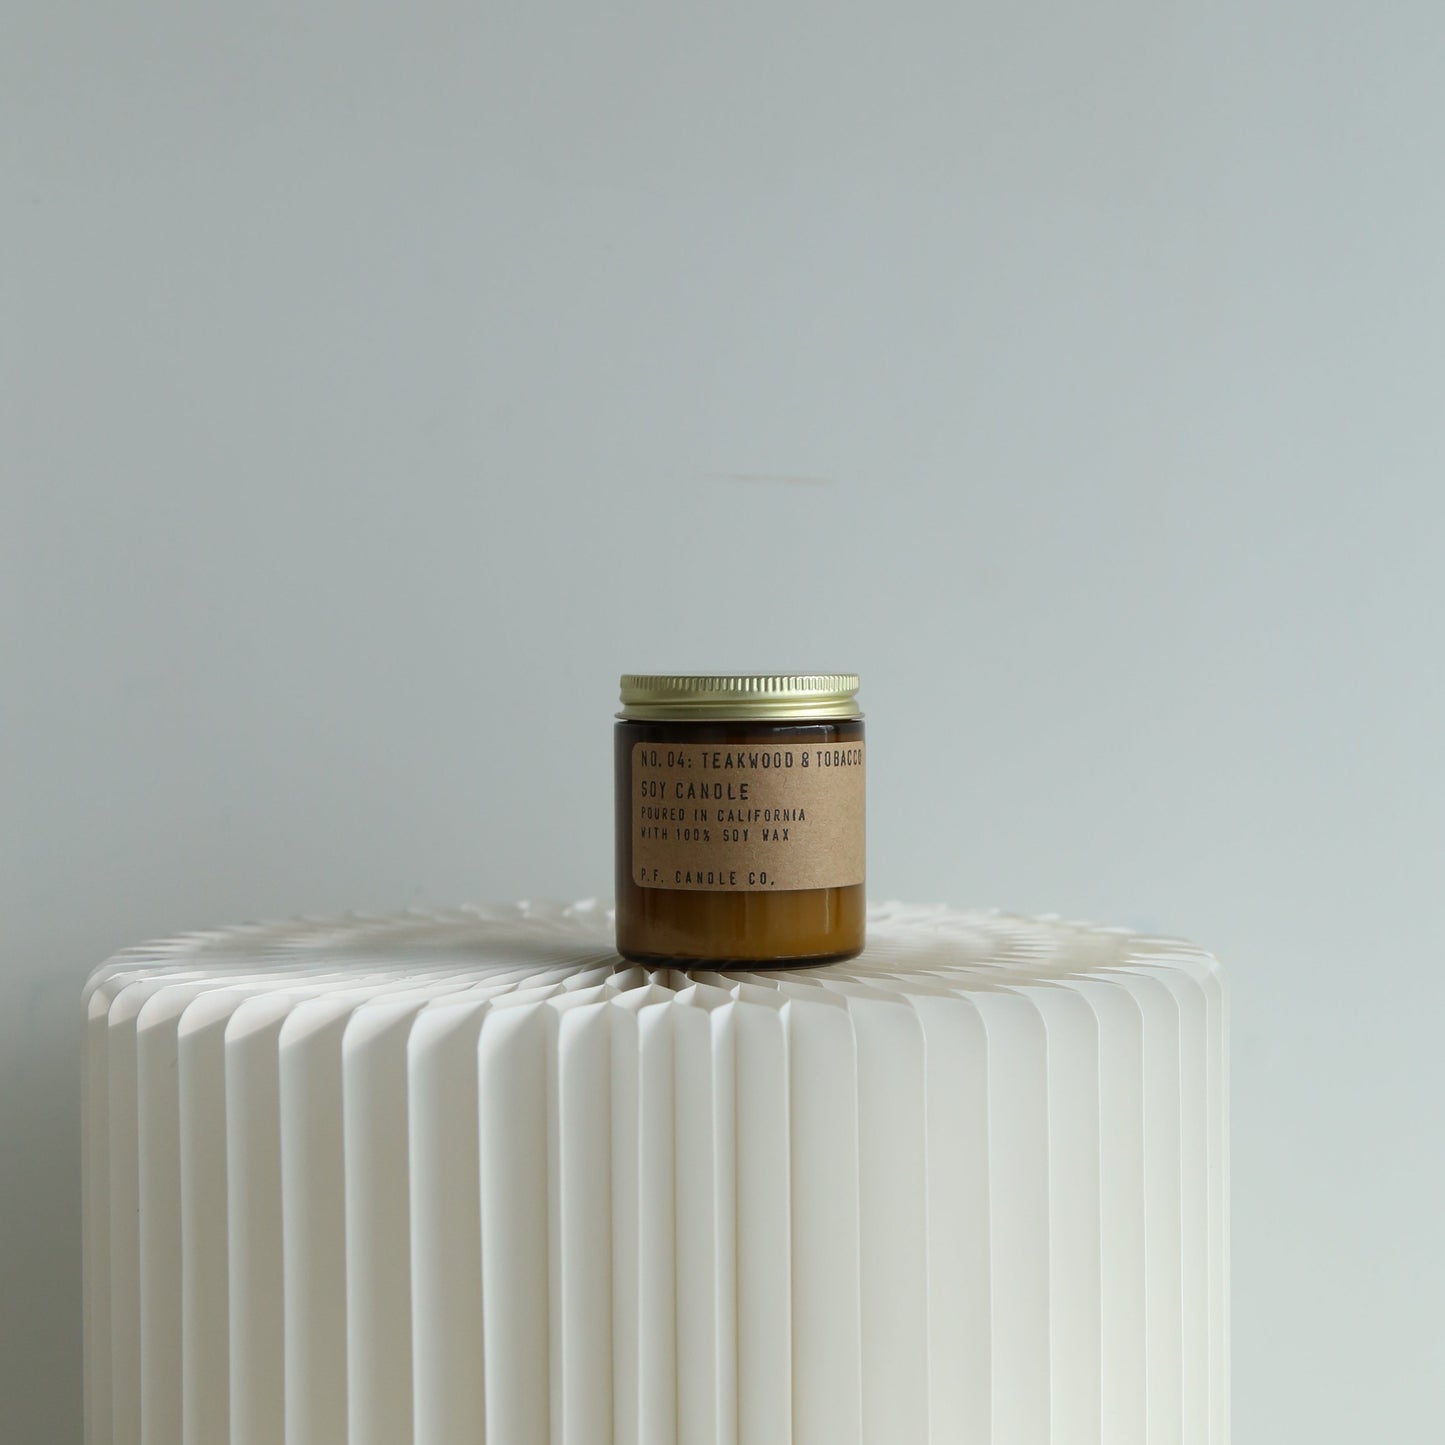 P.F. Candle Co mini teakwood and tobacco candle available at Rook & Rose.